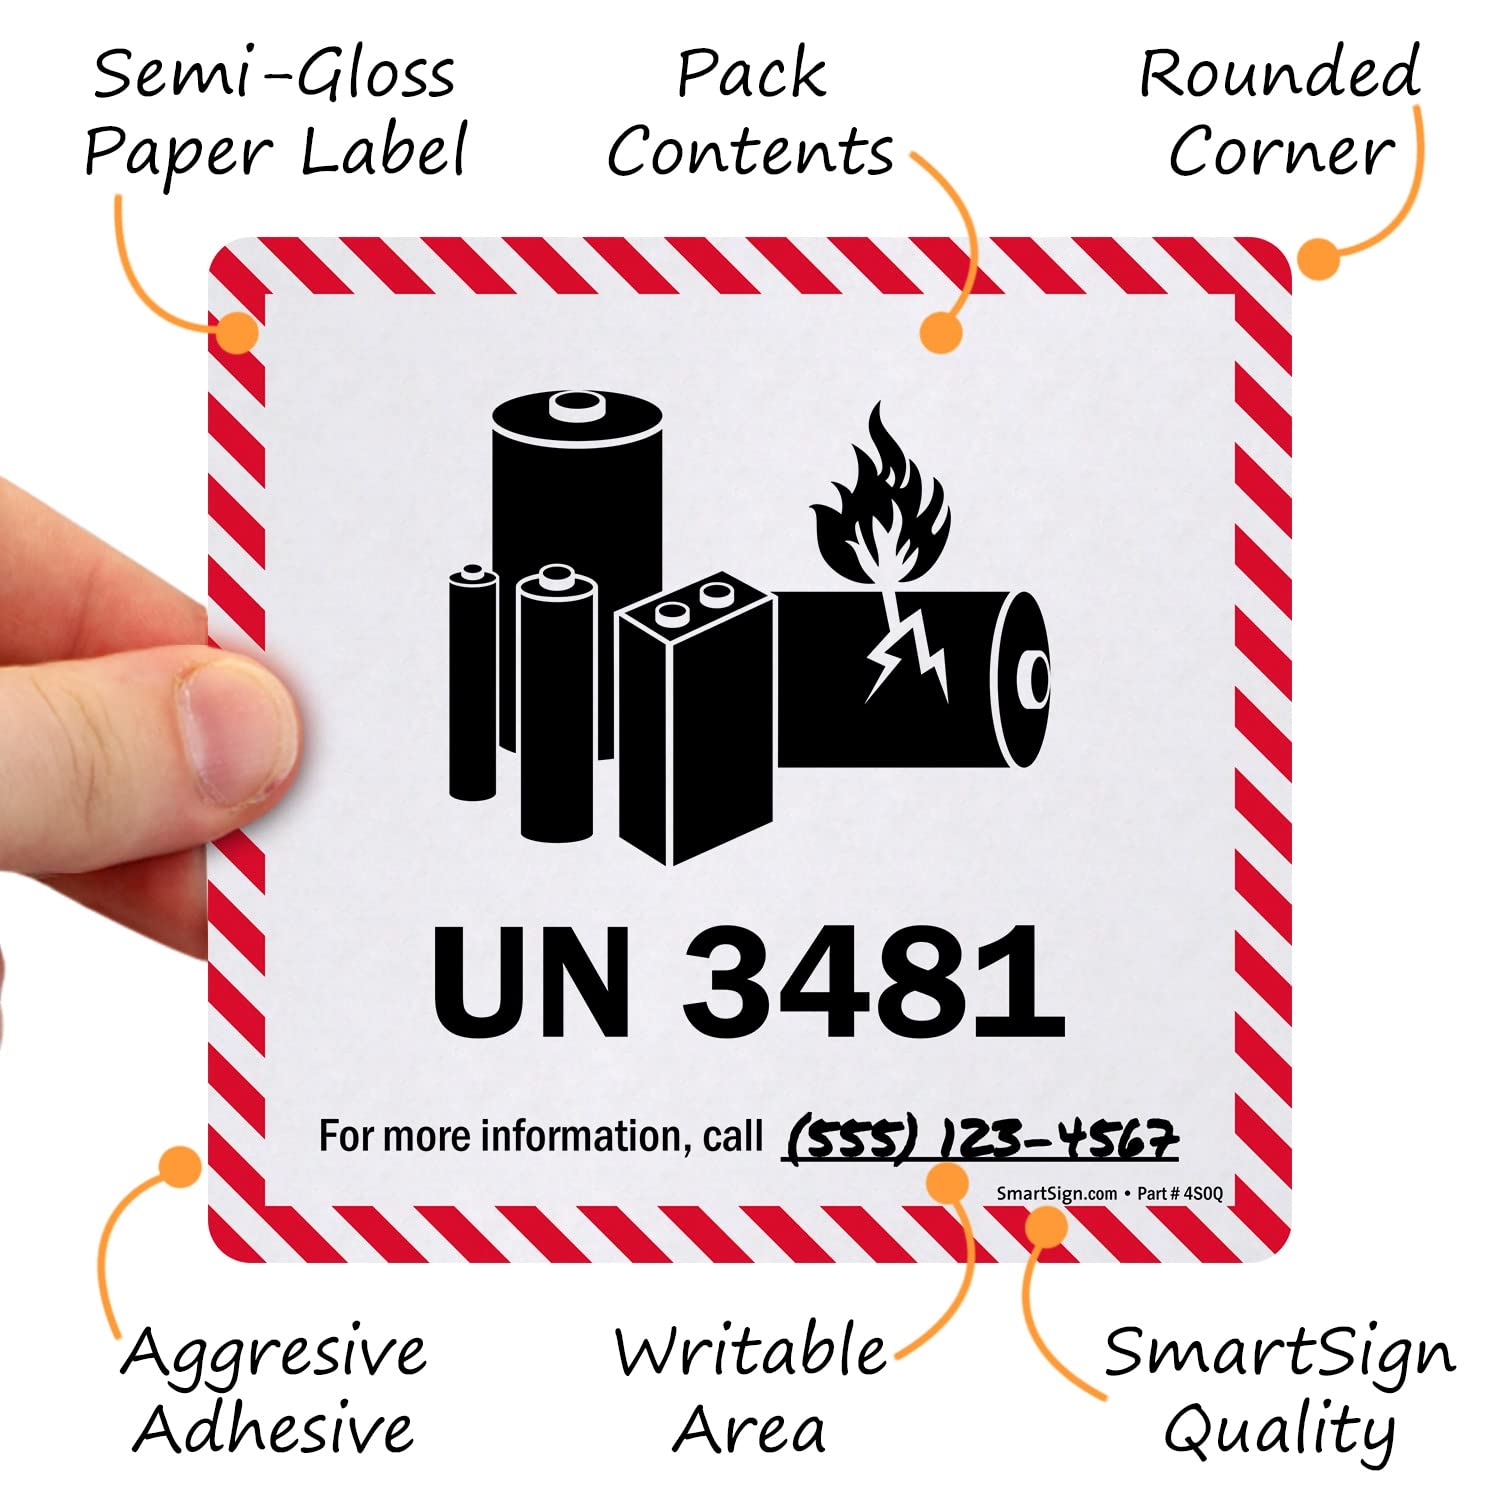 Amazon SmartSign Pack Of 250 UN 3481 Lithium Battery Labels On A Roll 4 75 X 4 5 Semi Gloss Paper Office Products